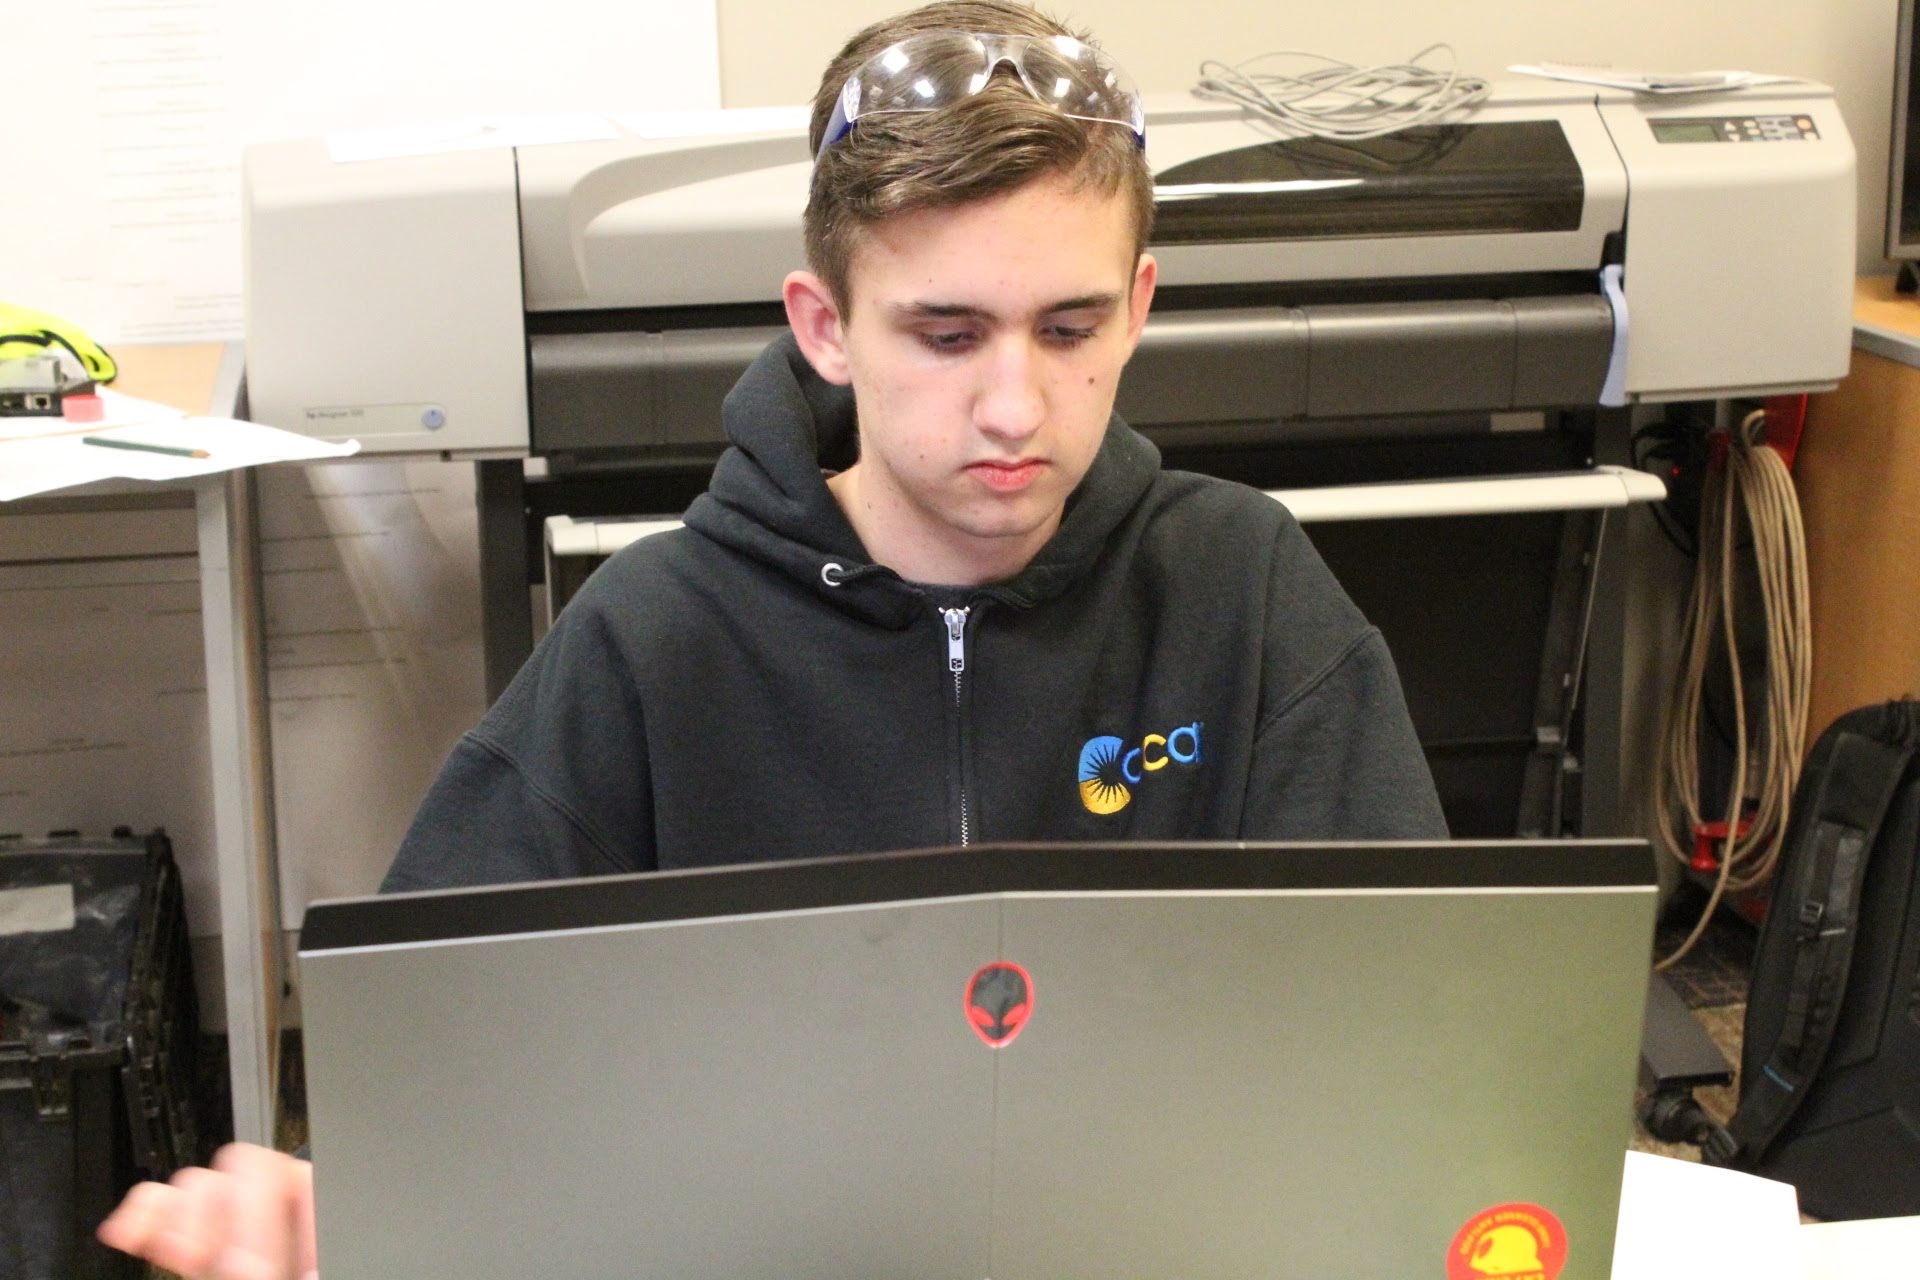 Drake Christianson works on creating face masks for a local hospital using his 3D printer.